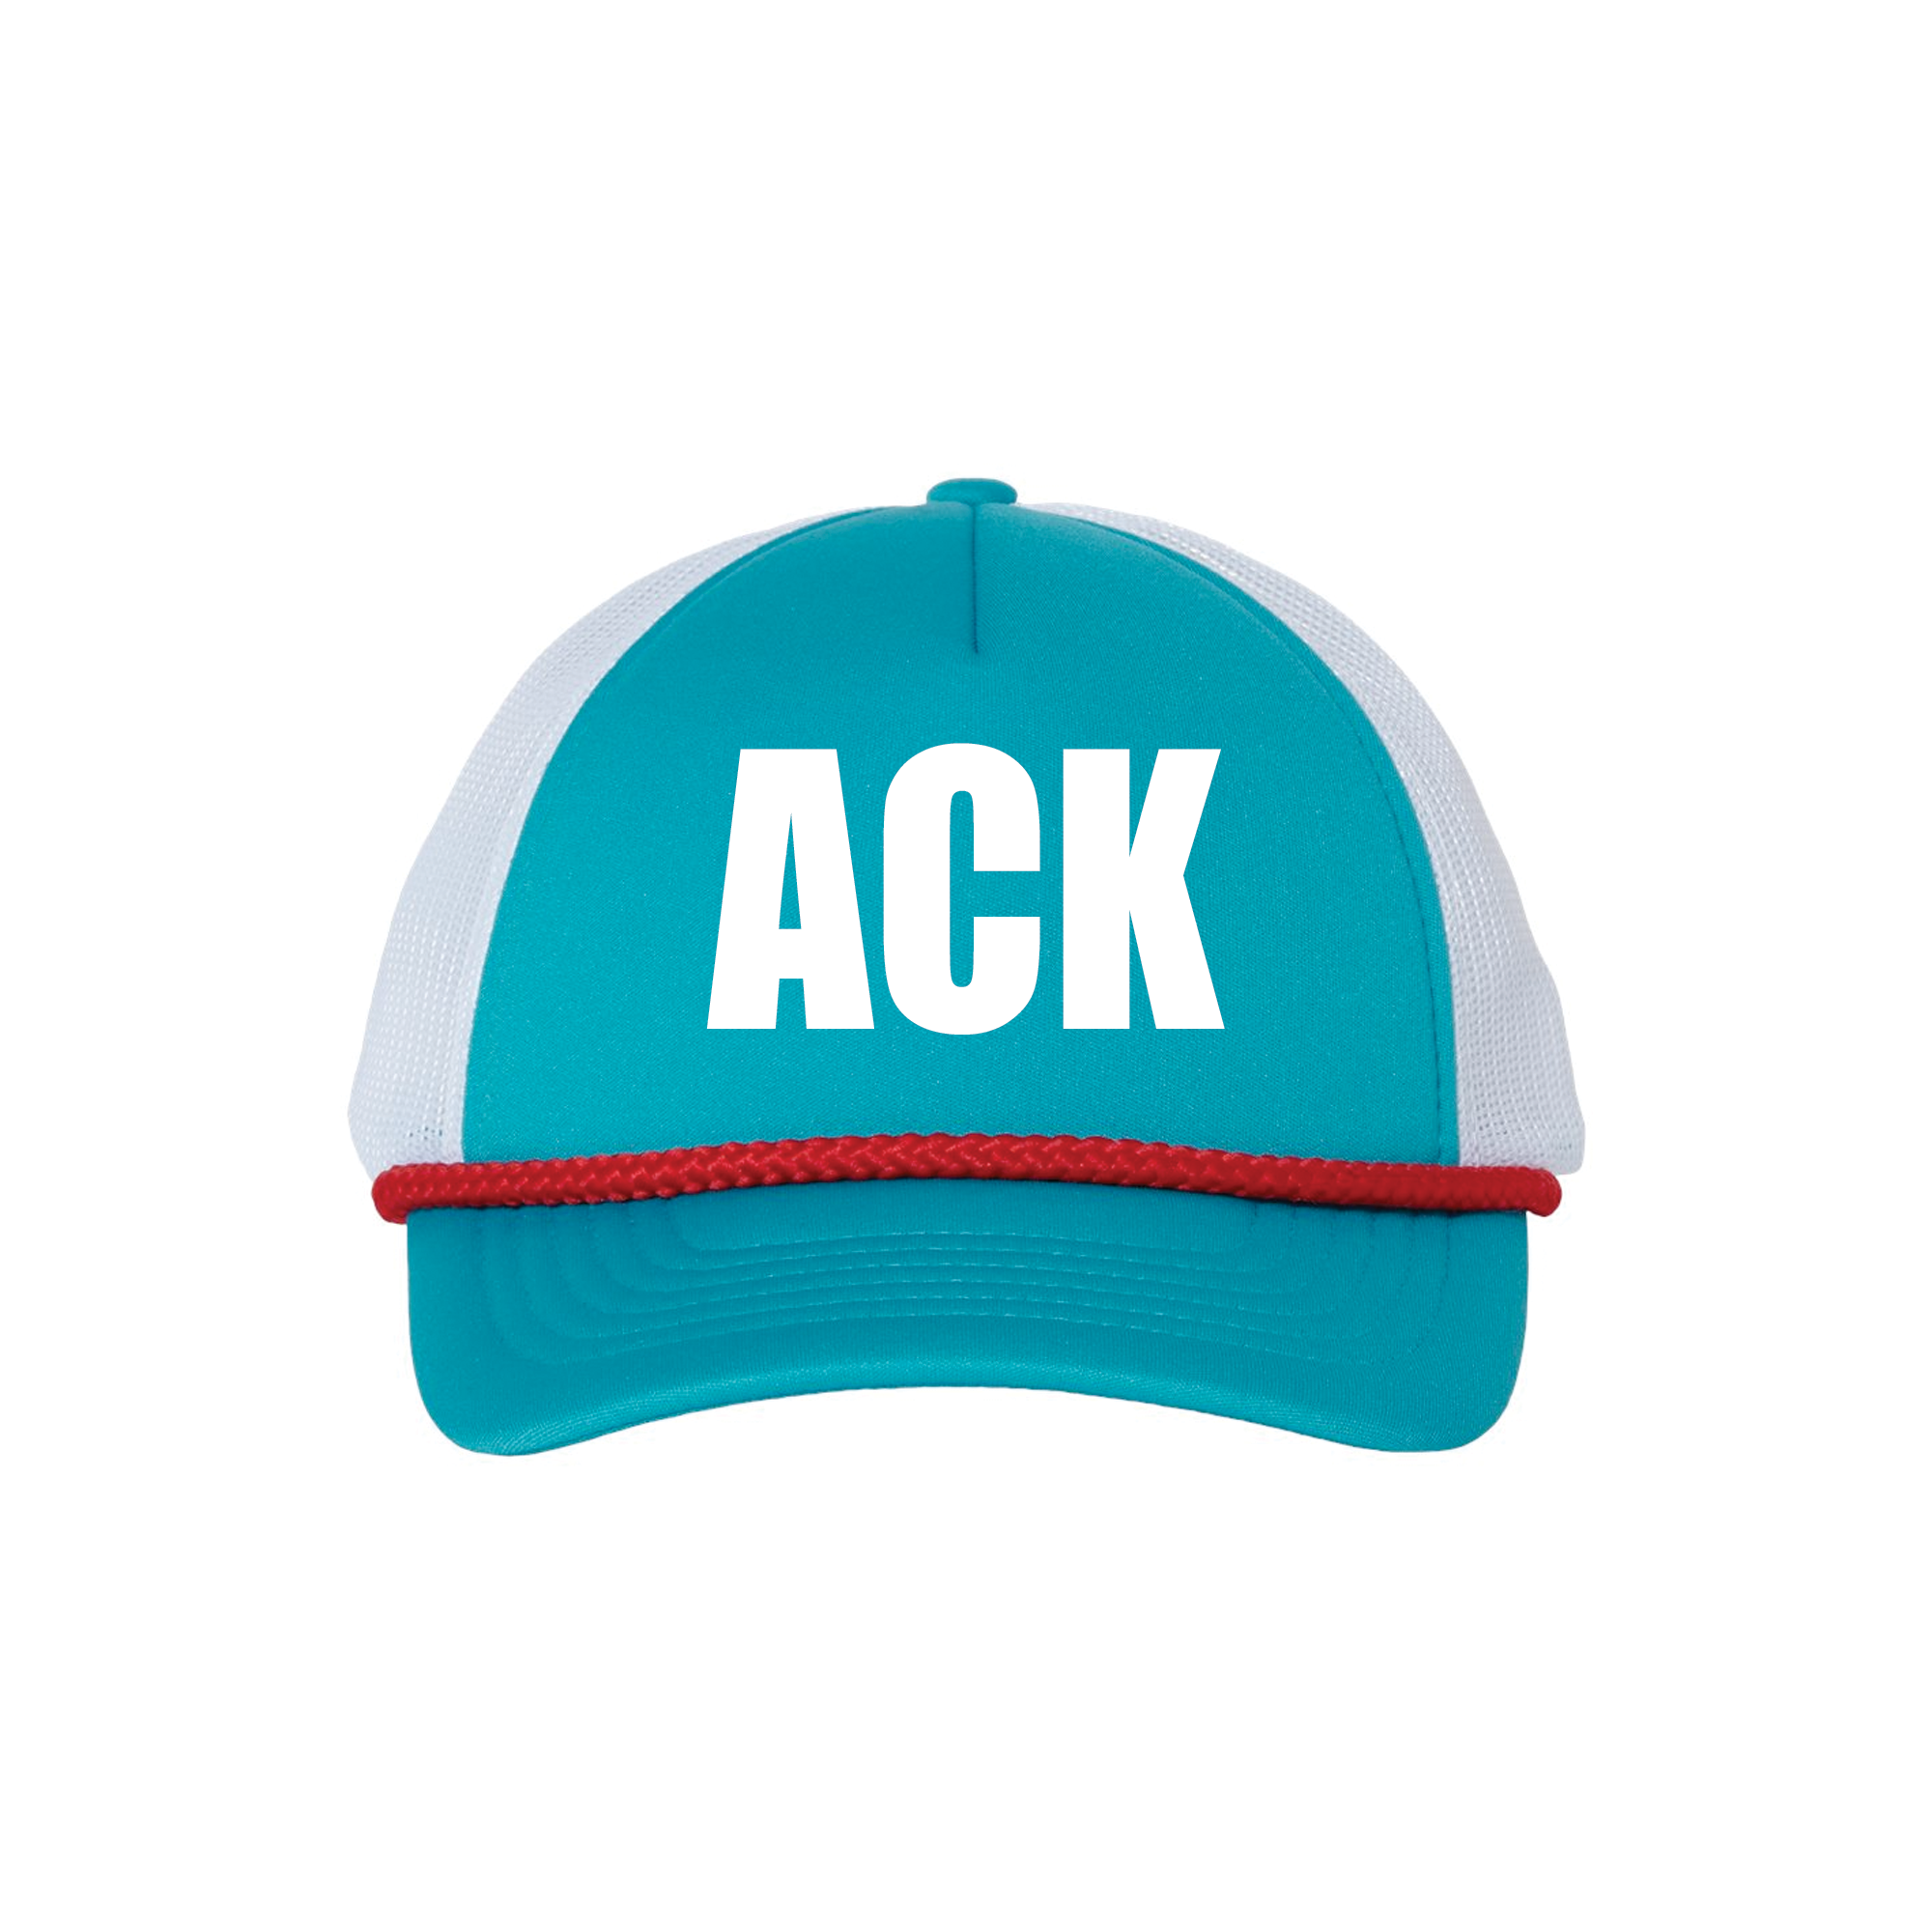 ACK Trucker Hat with Rope (Teal/White, White, Red)